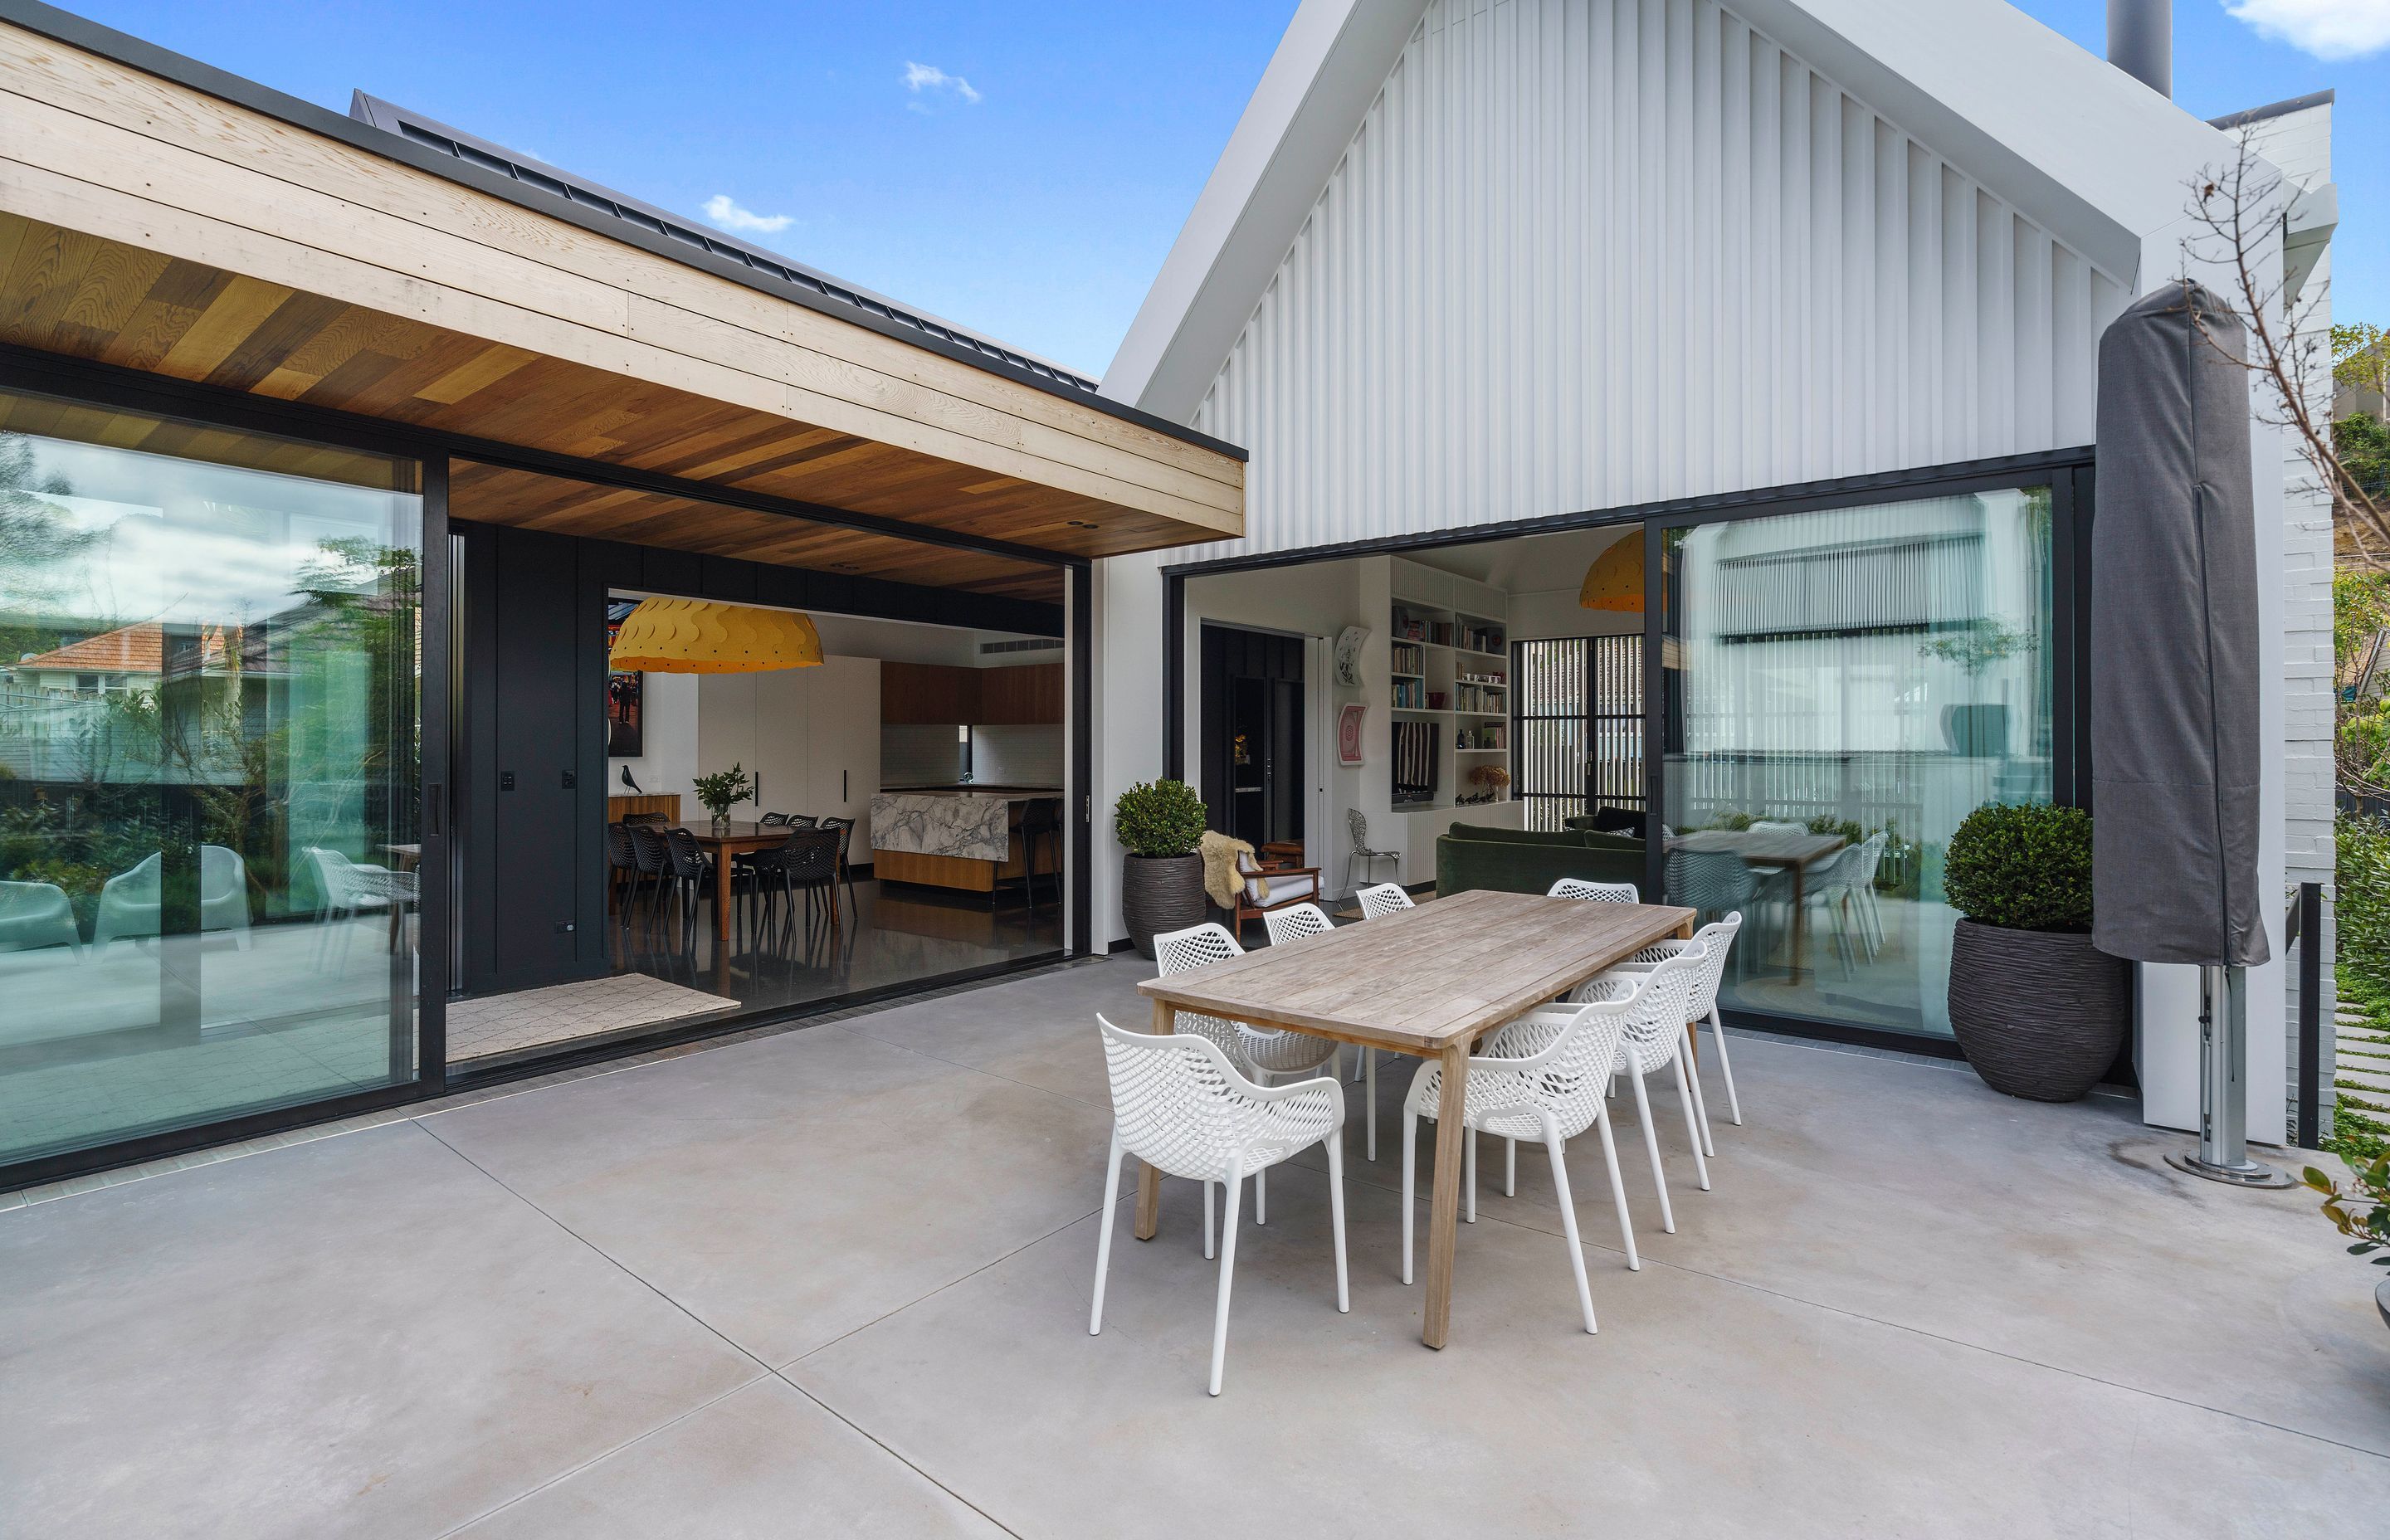 The house has been set up for large-scale entertaining with multiple areas all radiating off the courtyard space.